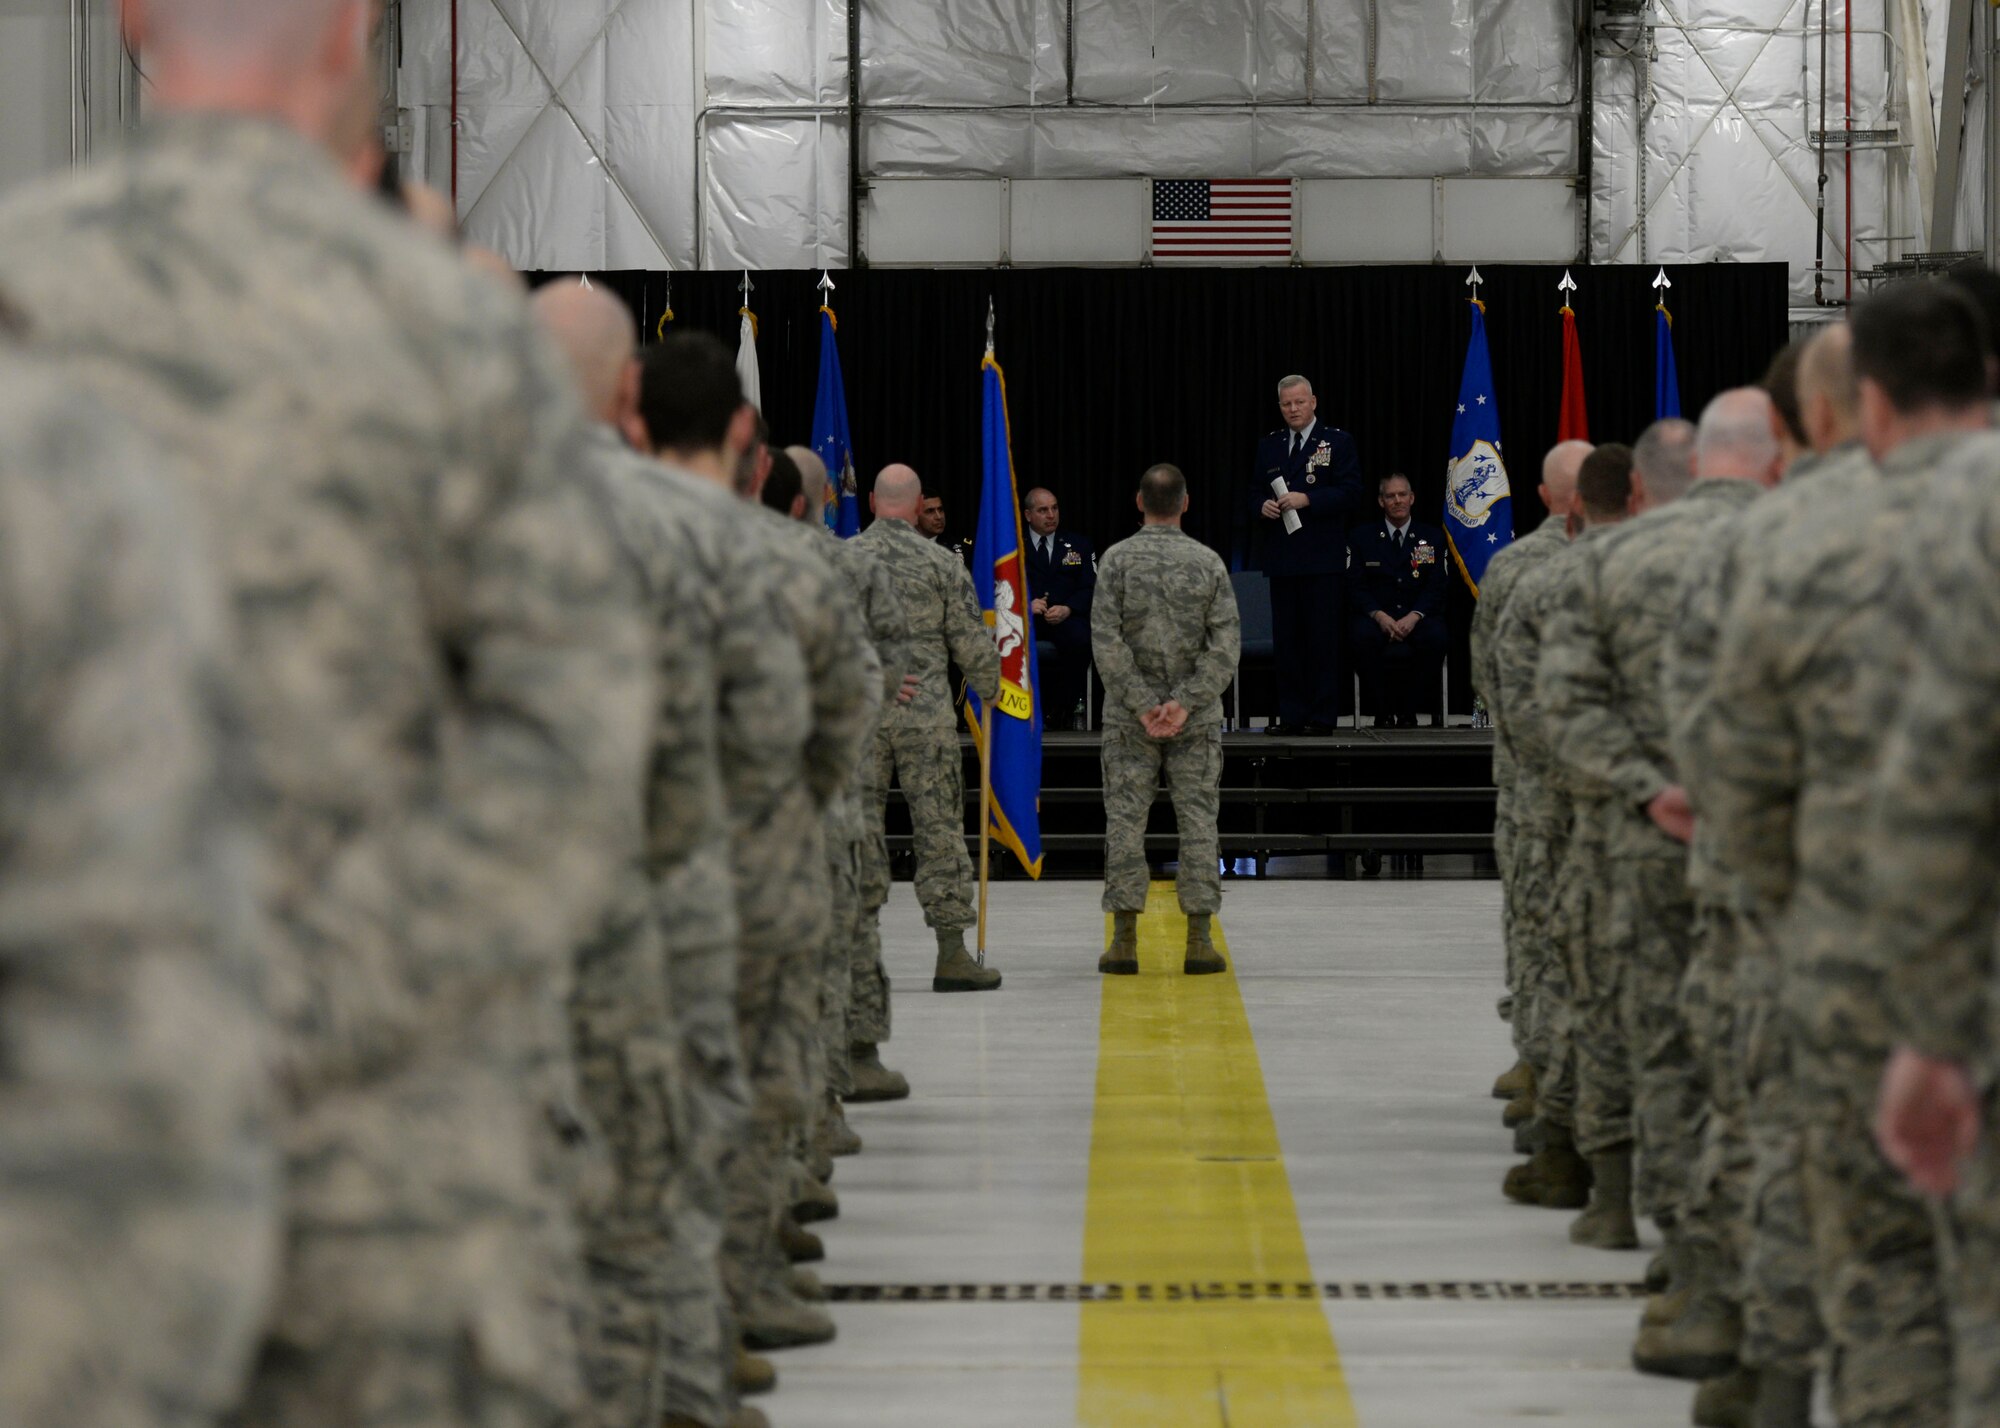 Brig. Gen. Paul Hutchinson addresses members of the 157th Air Refueling Wing during his retirement ceremony at Pease Air National Guard Base, N.H., Jan. 6, 2018. Hutchinson retired after serving as the assistant adjutant general for three years. (N.H. Air National Guard photo by Senior Airman Taylor Queen)